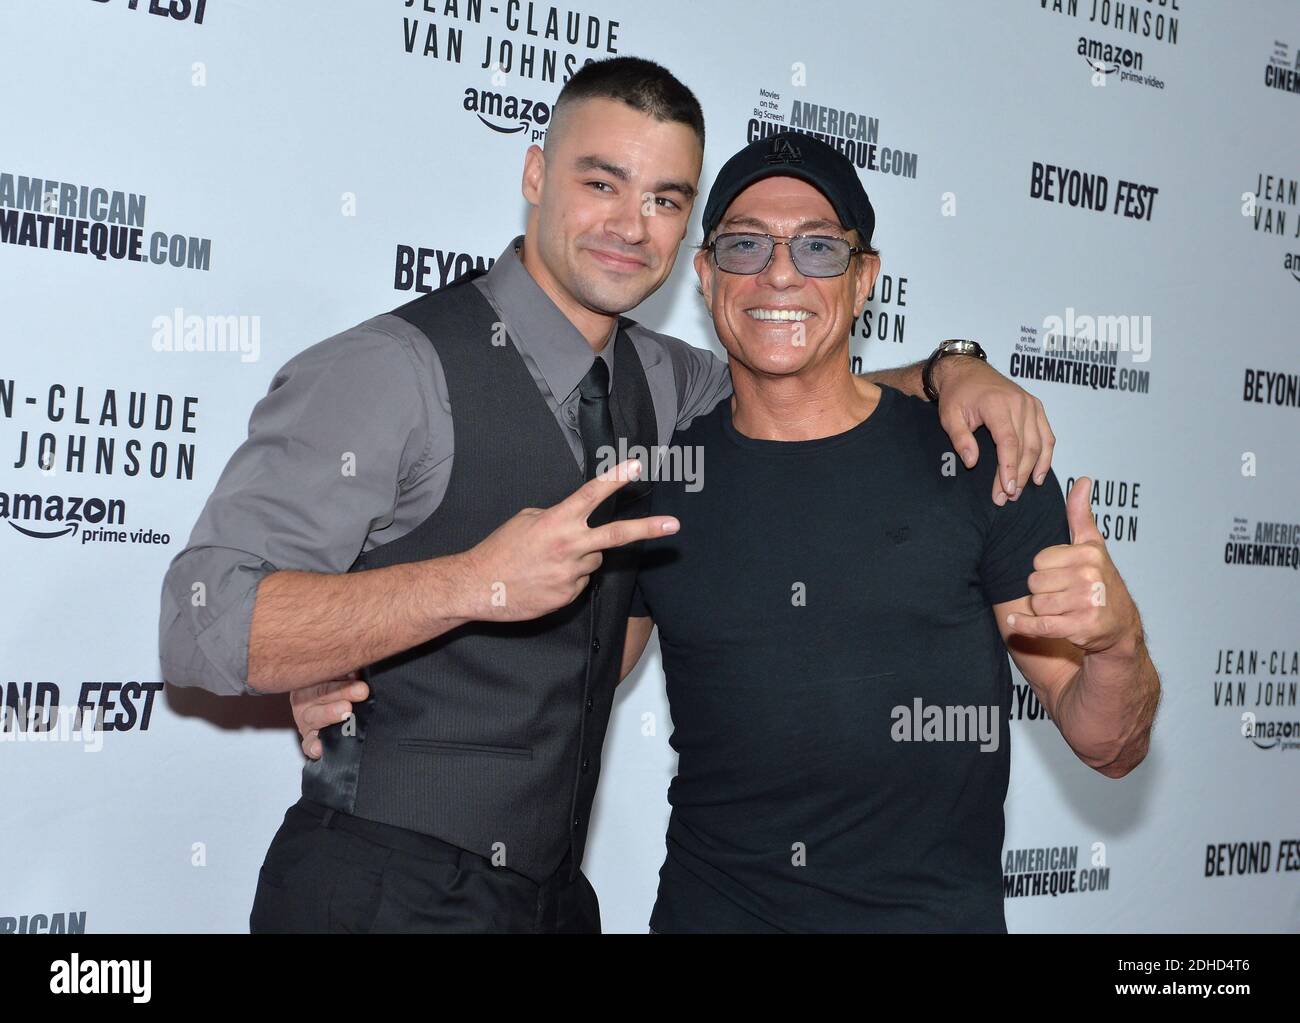 Kristopher Van Varenberg ( his son ) and Jean-Claude Van Damme attend the  Beyond Fest screening and Cast/Creator panel of Amazon Prime Video's  exclusive series 'Jean-Claude Van Johnson' at the Egyptian Theatre